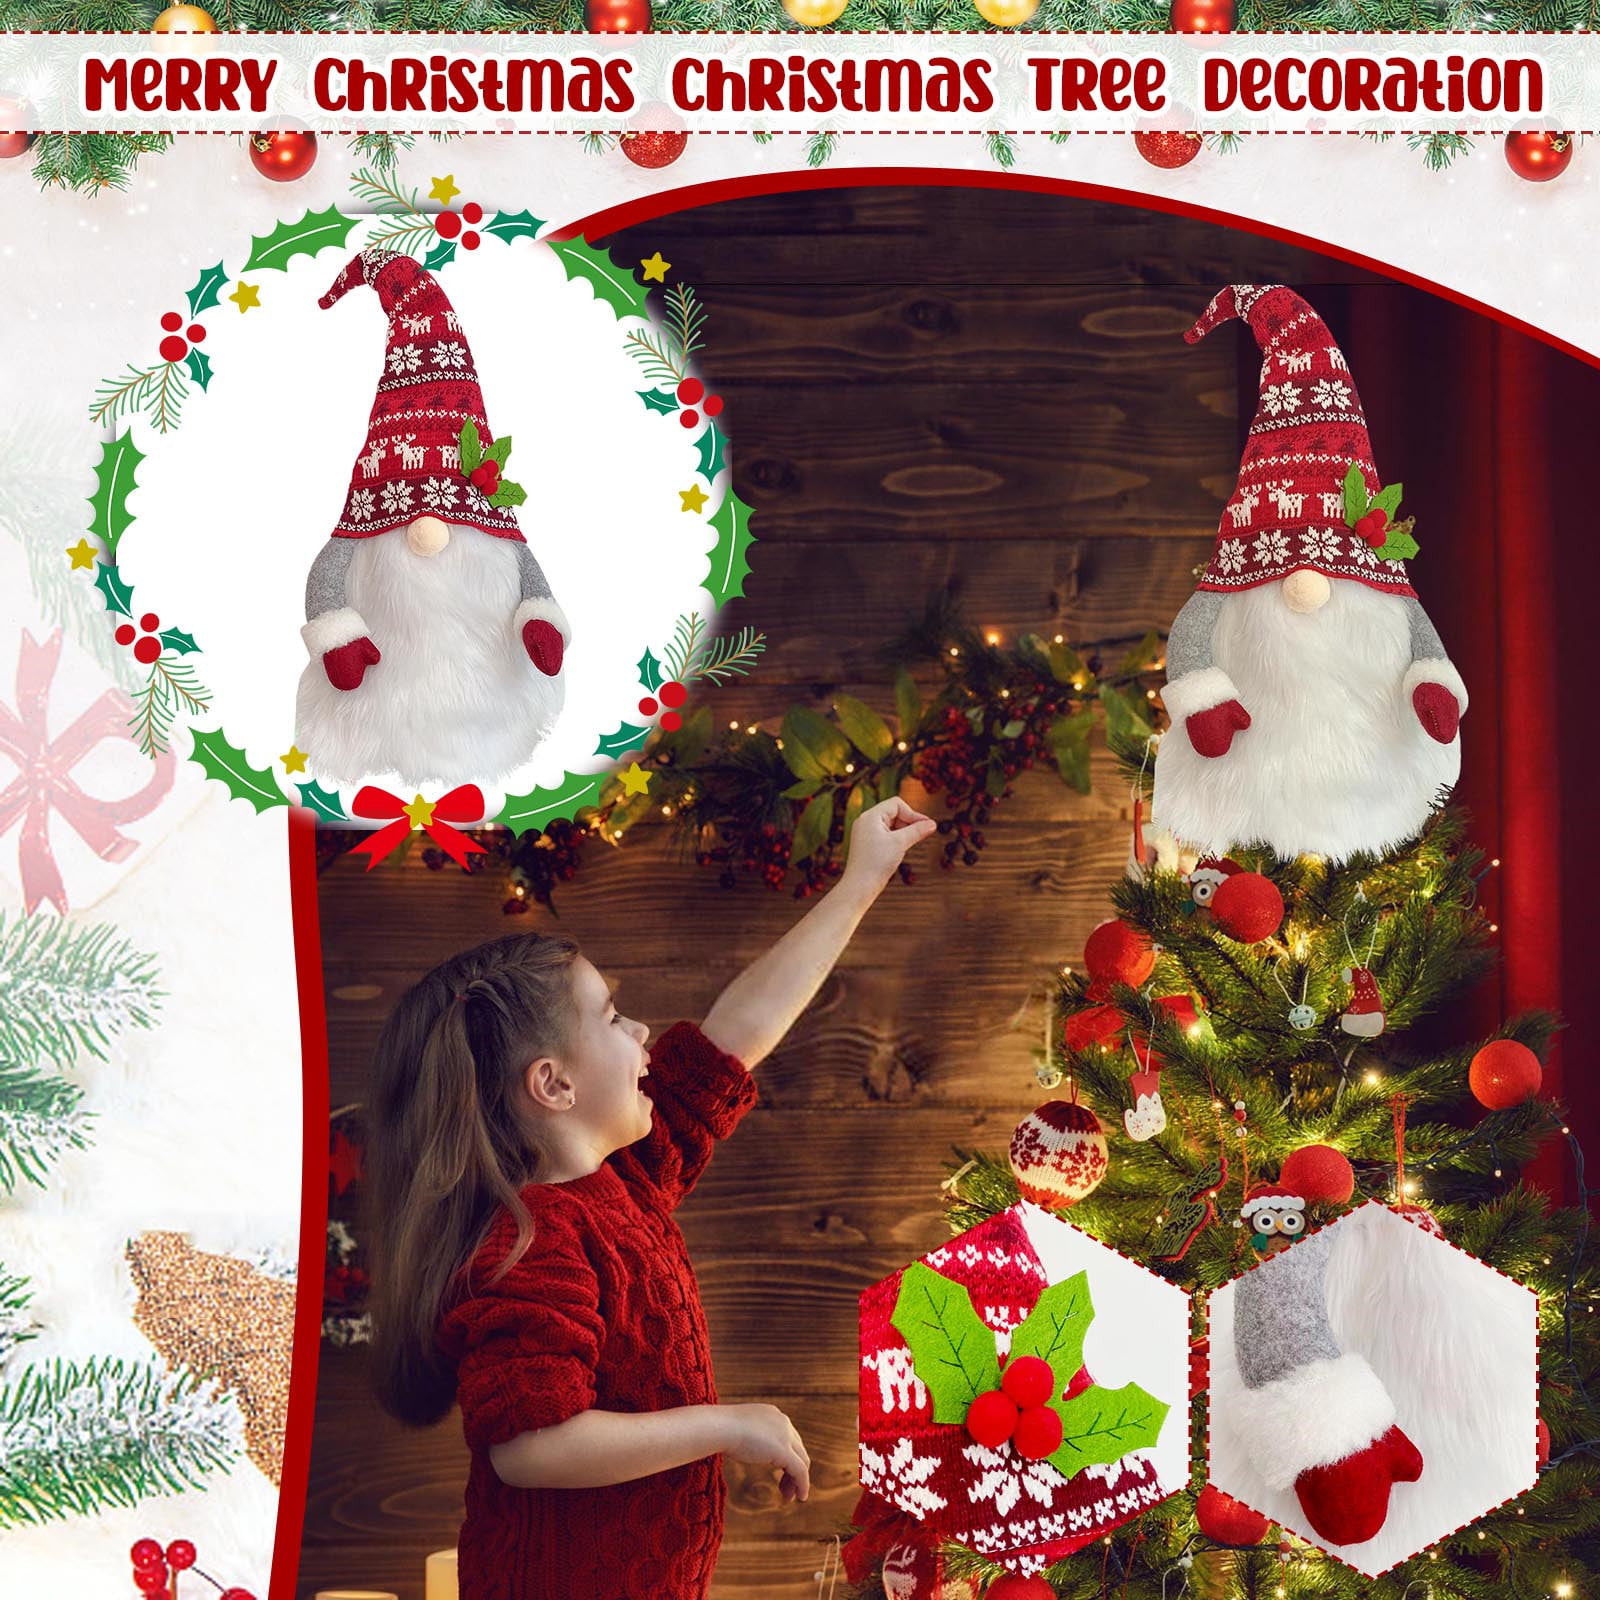 Details about   Santa Claus Doll natural look Christmas Ornament Xmas Tree Deco Gift for kids 